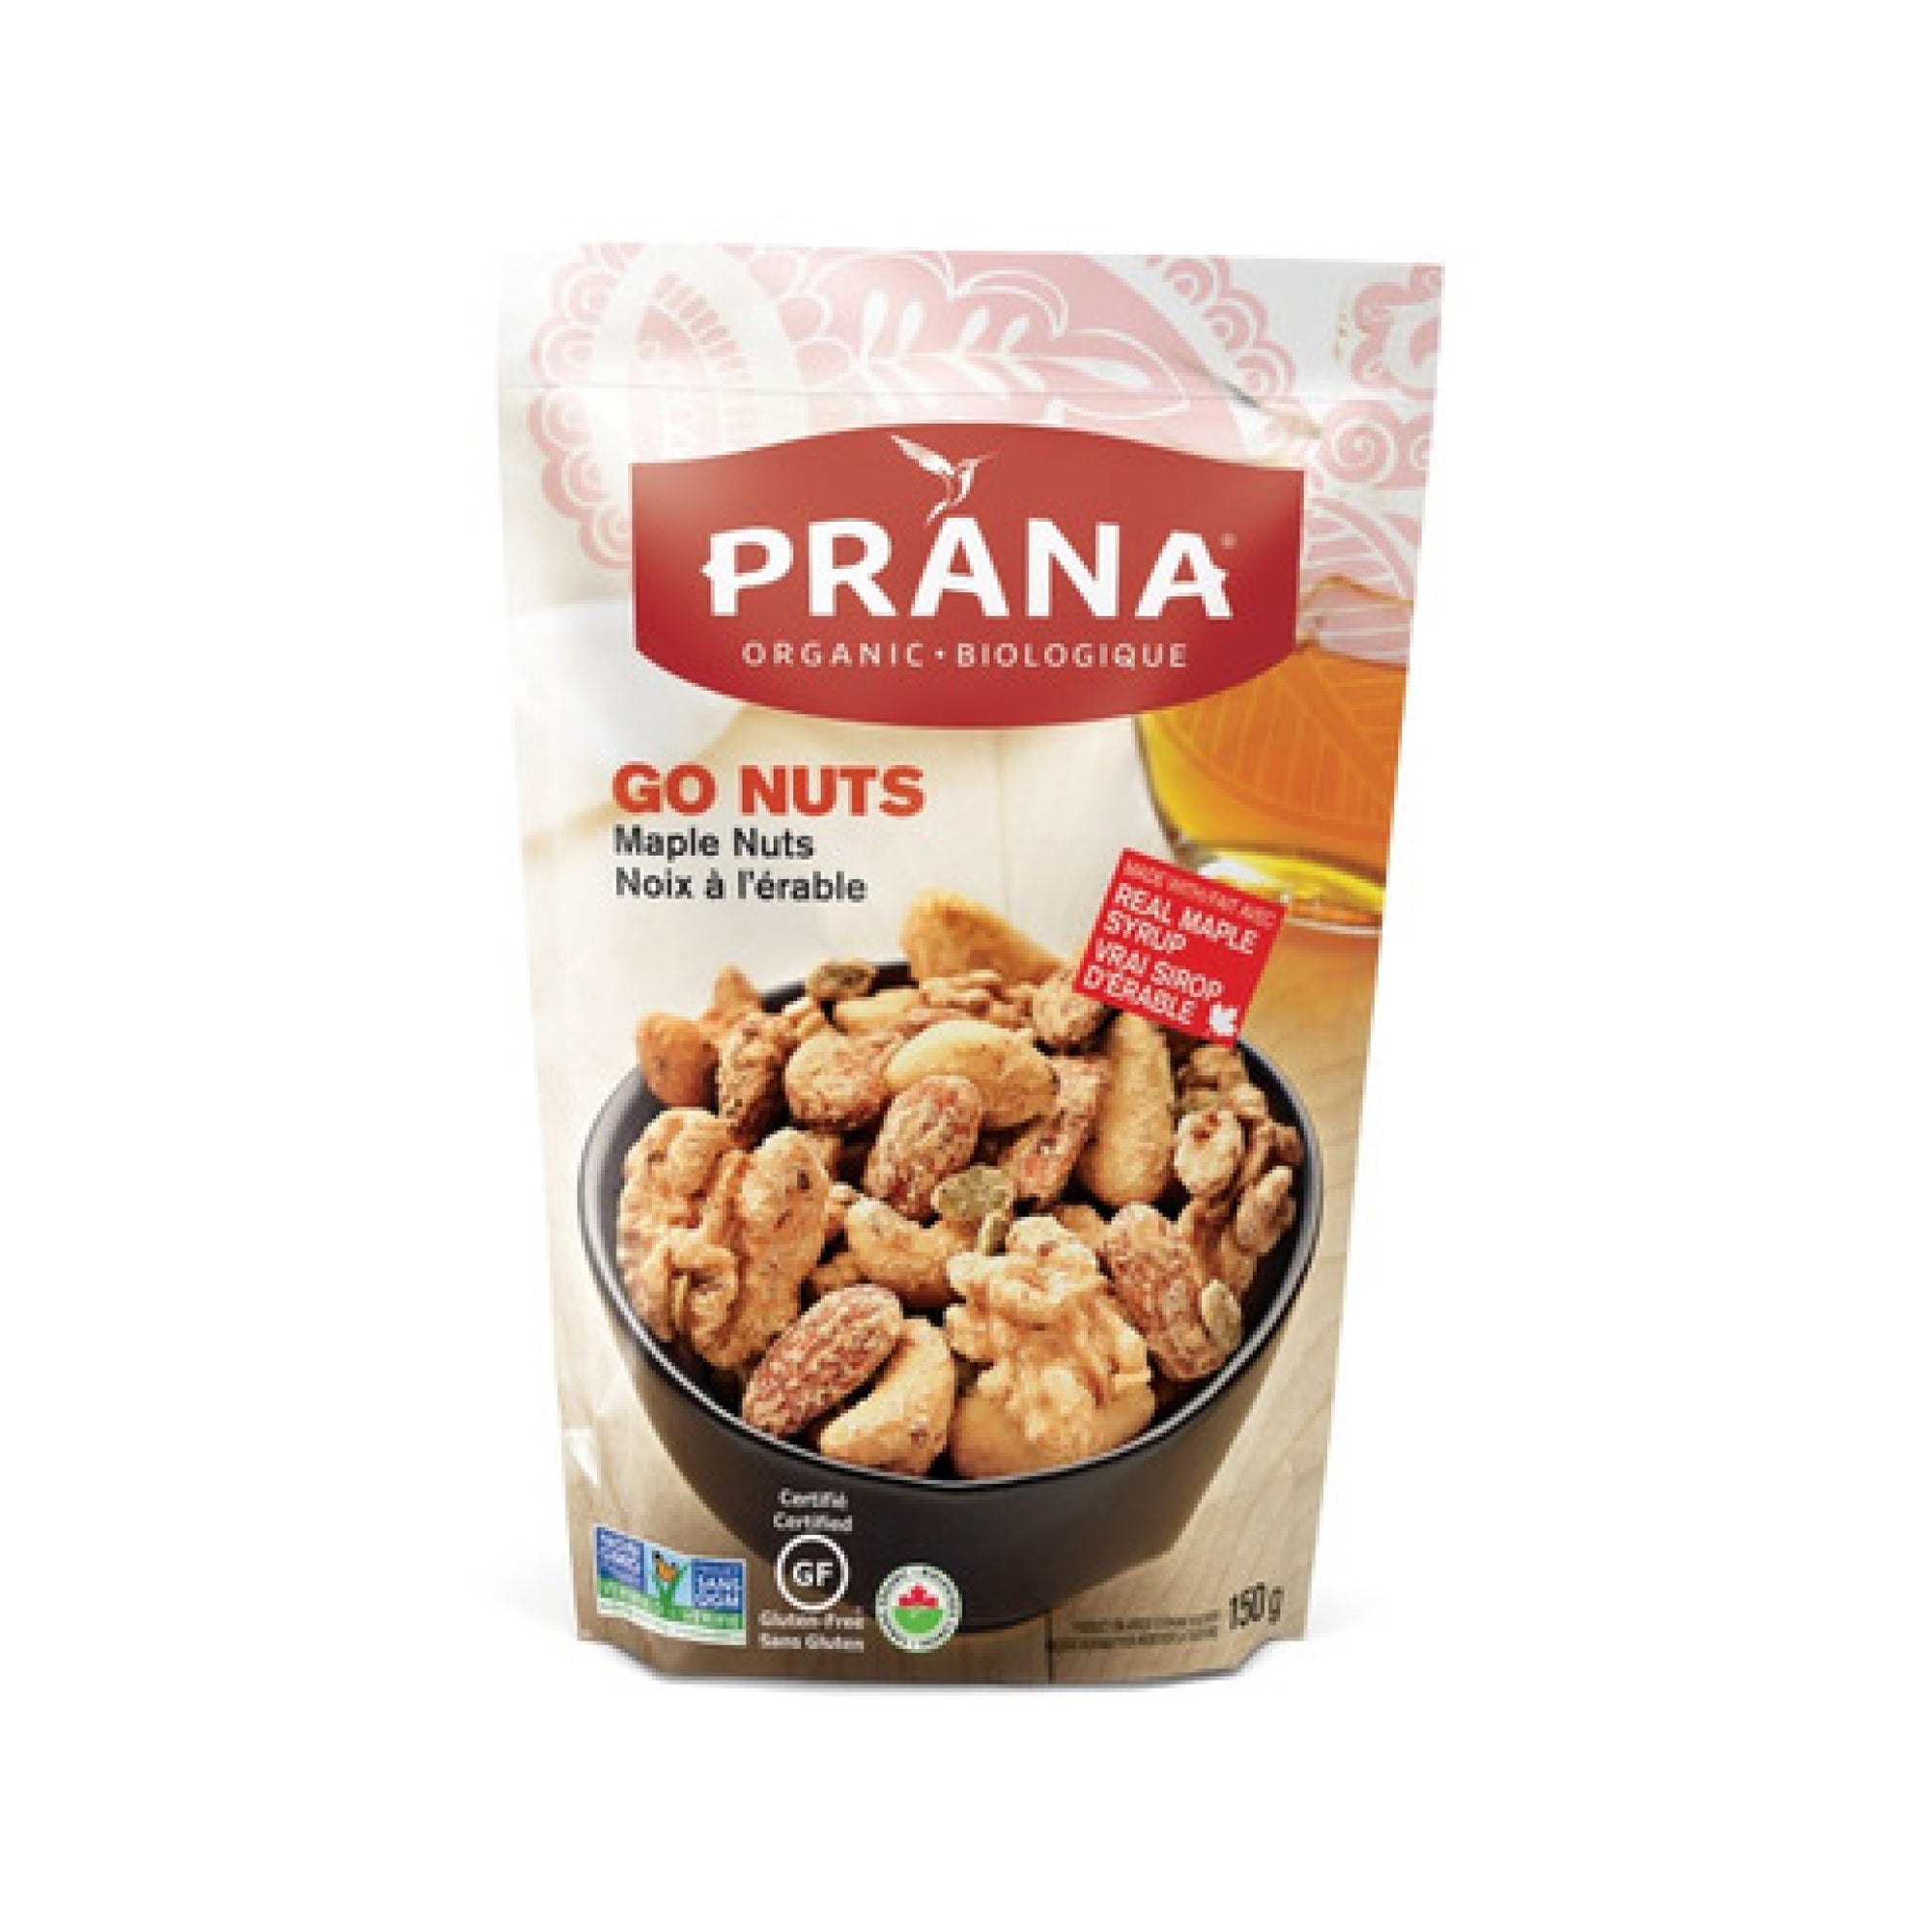 Prana Go Nuts Maple Nuts 150g